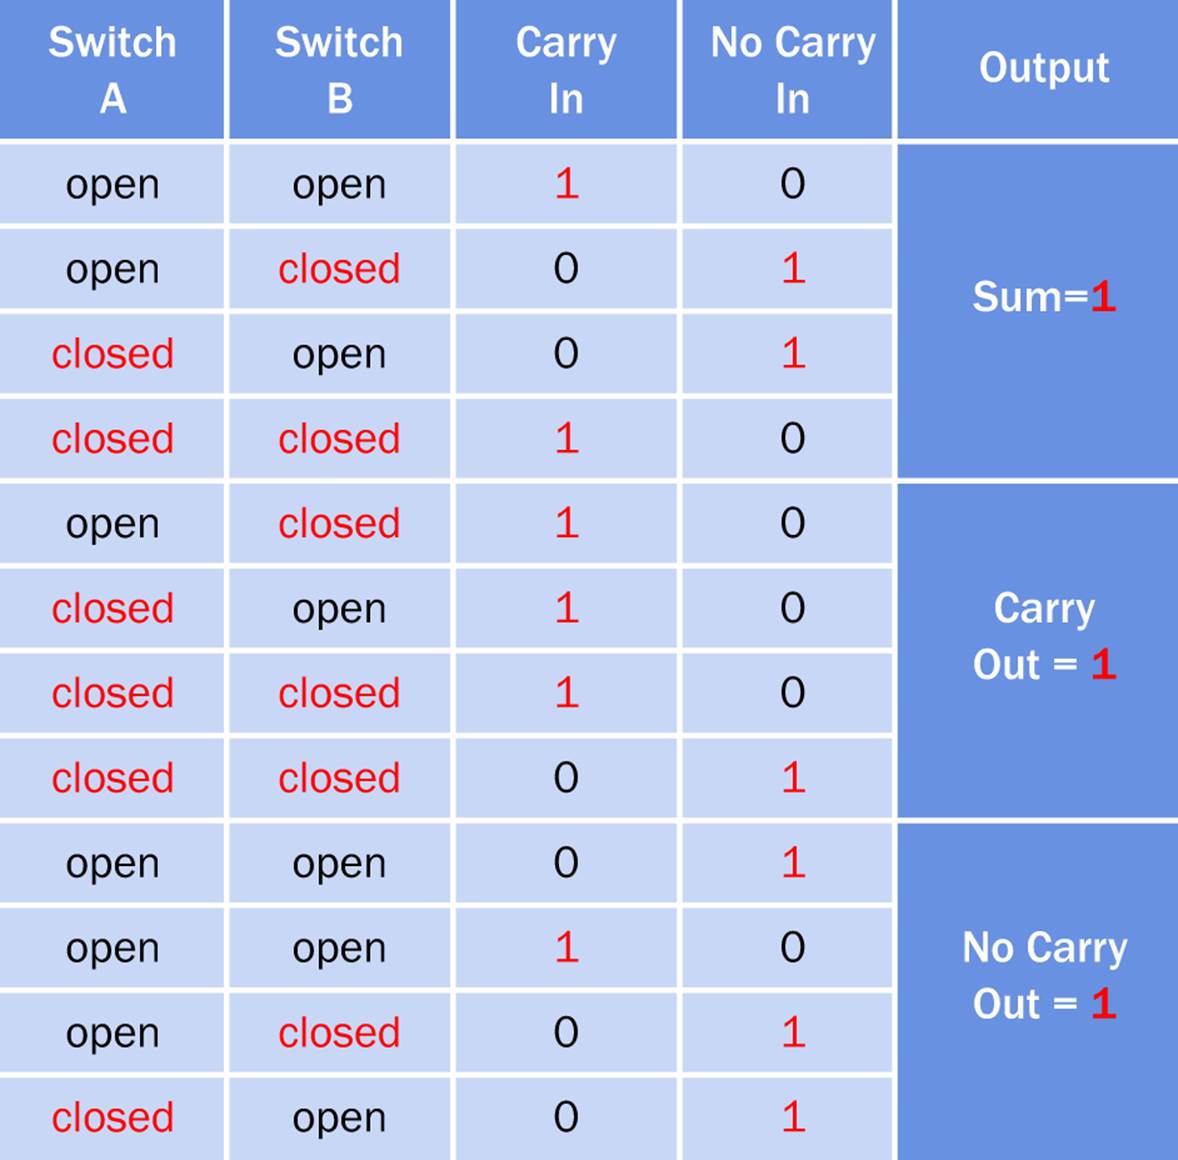 The outcomes from a full adder, for all possible input combinations.